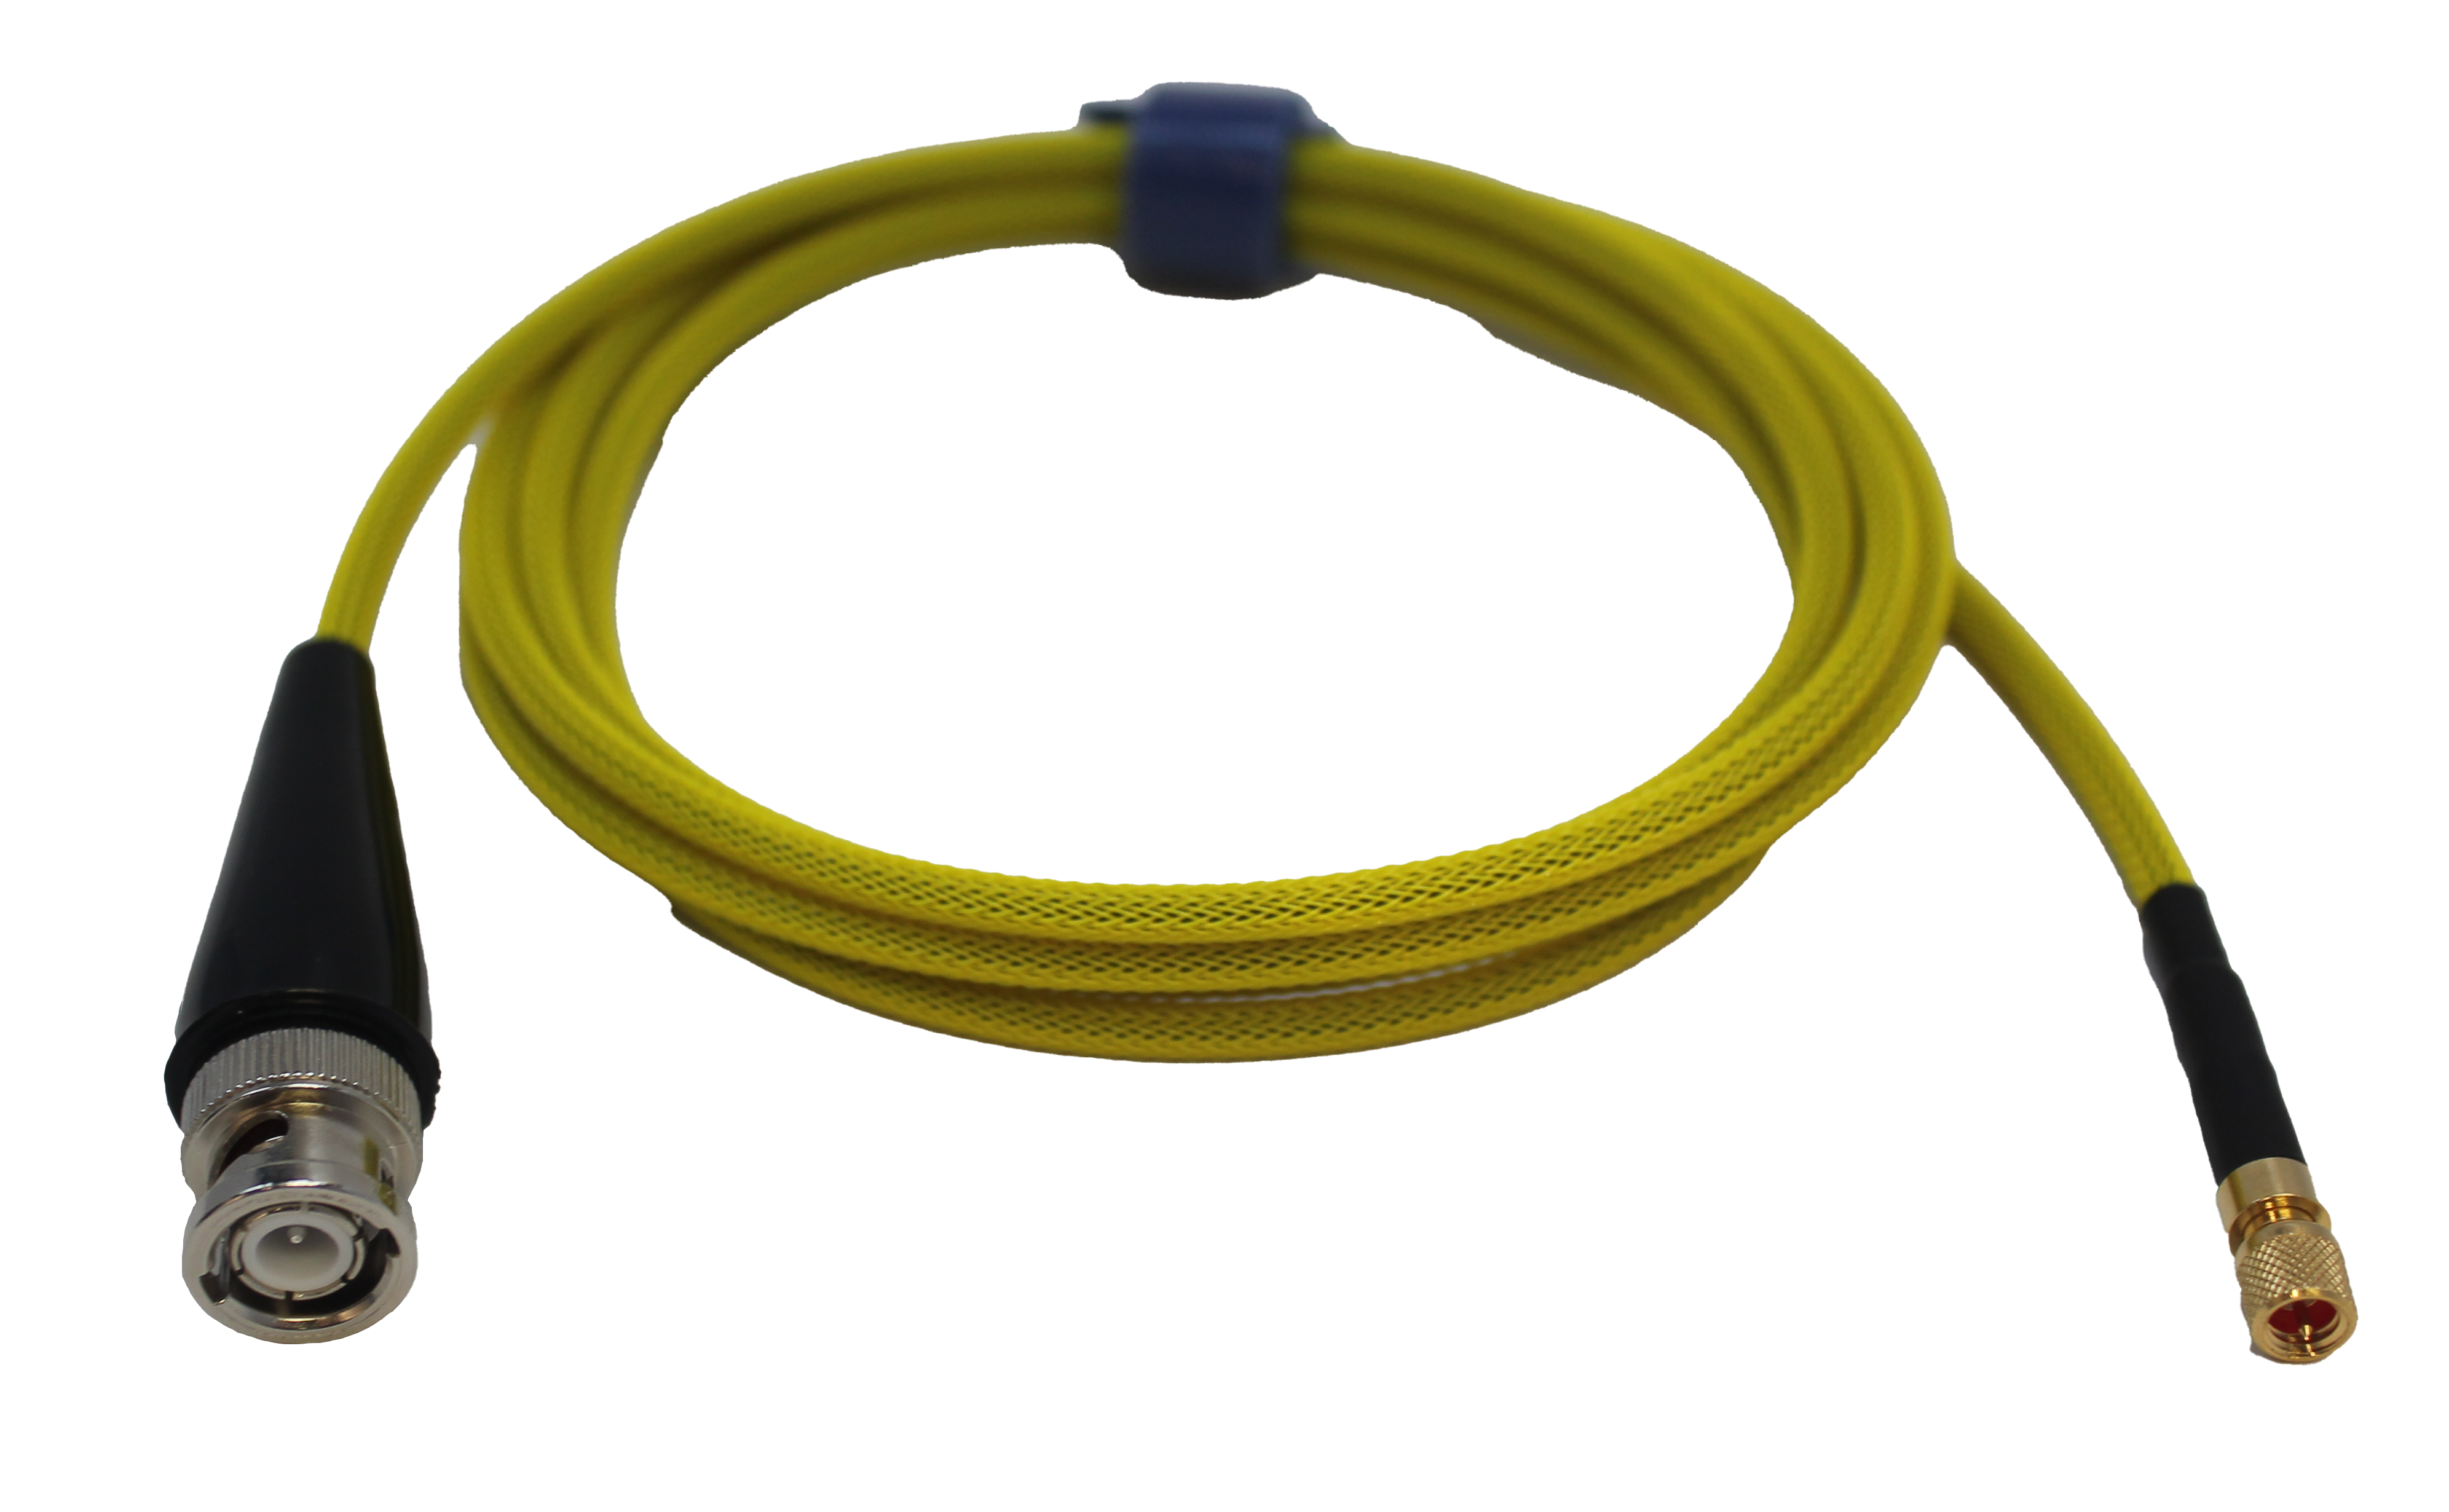 Berg Flame Yellow BNC to MD, RG-174 6'ft (Feet) Ultrasonic Cables